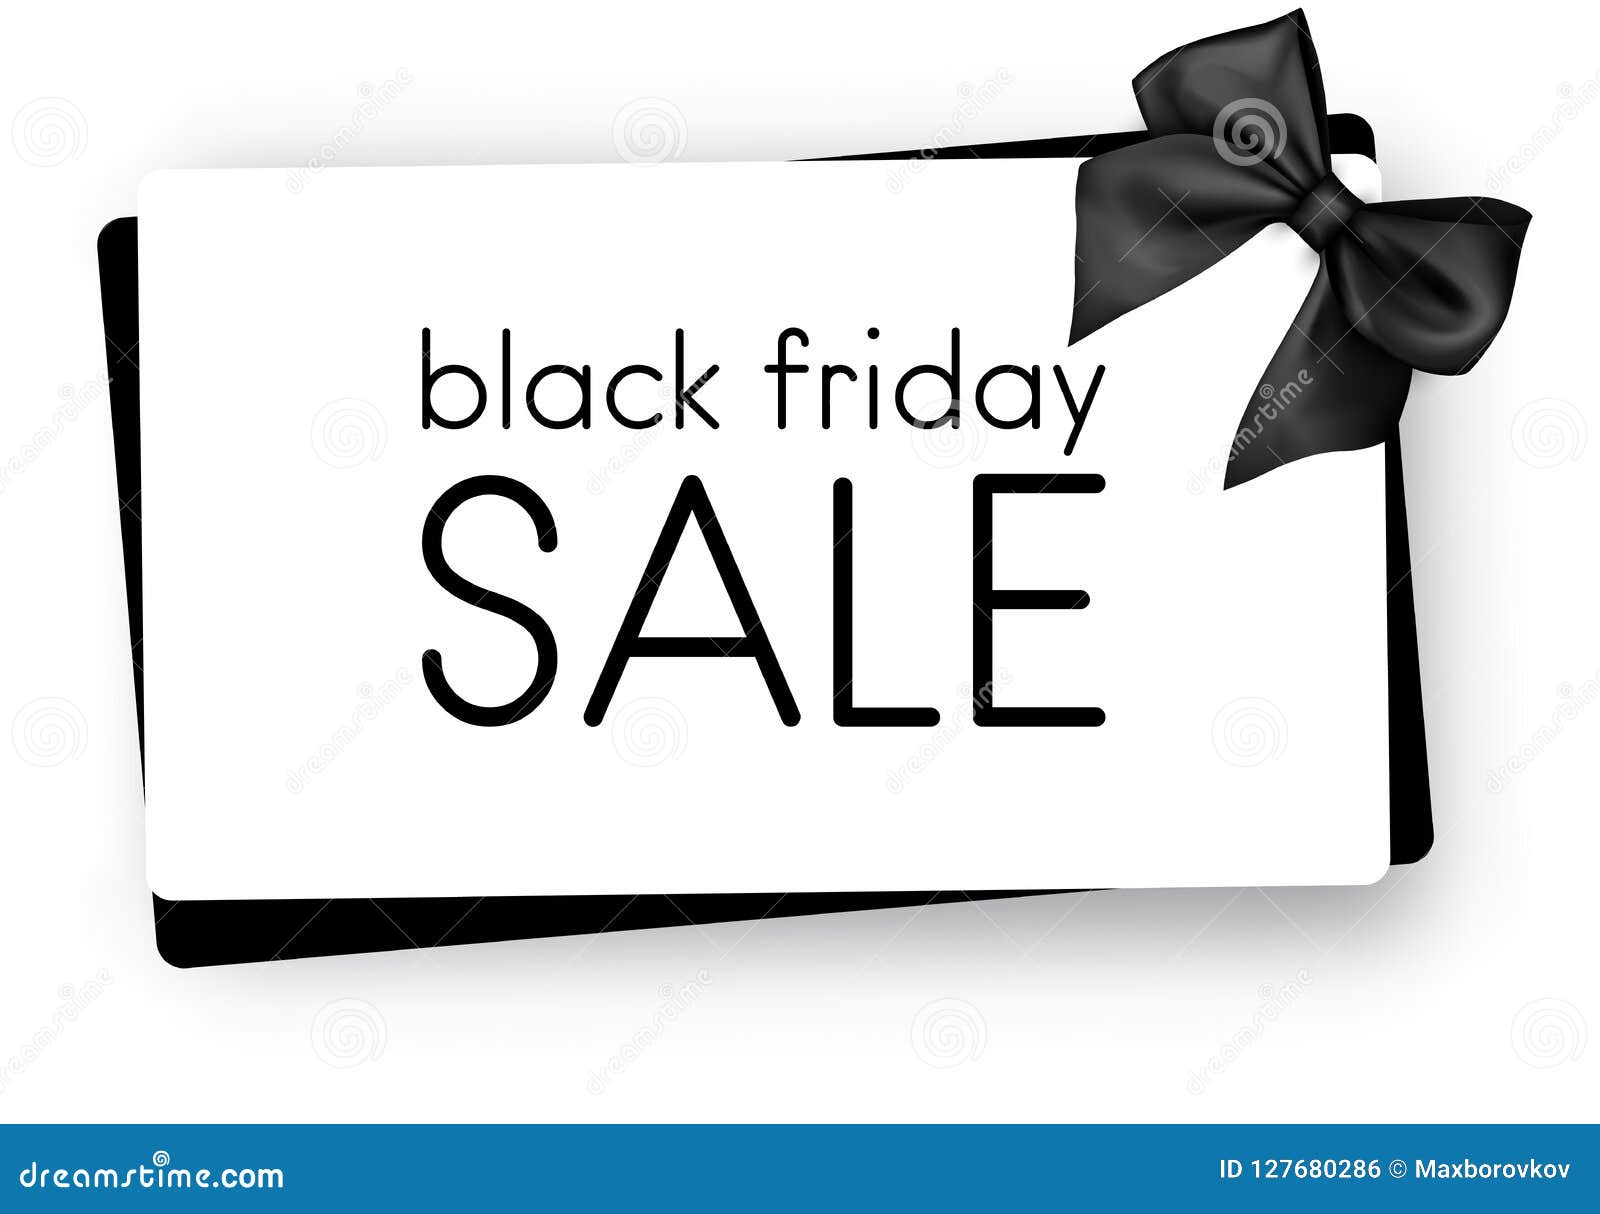 Black Friday Sale. Gift Card with Satin Bow. Stock Vector